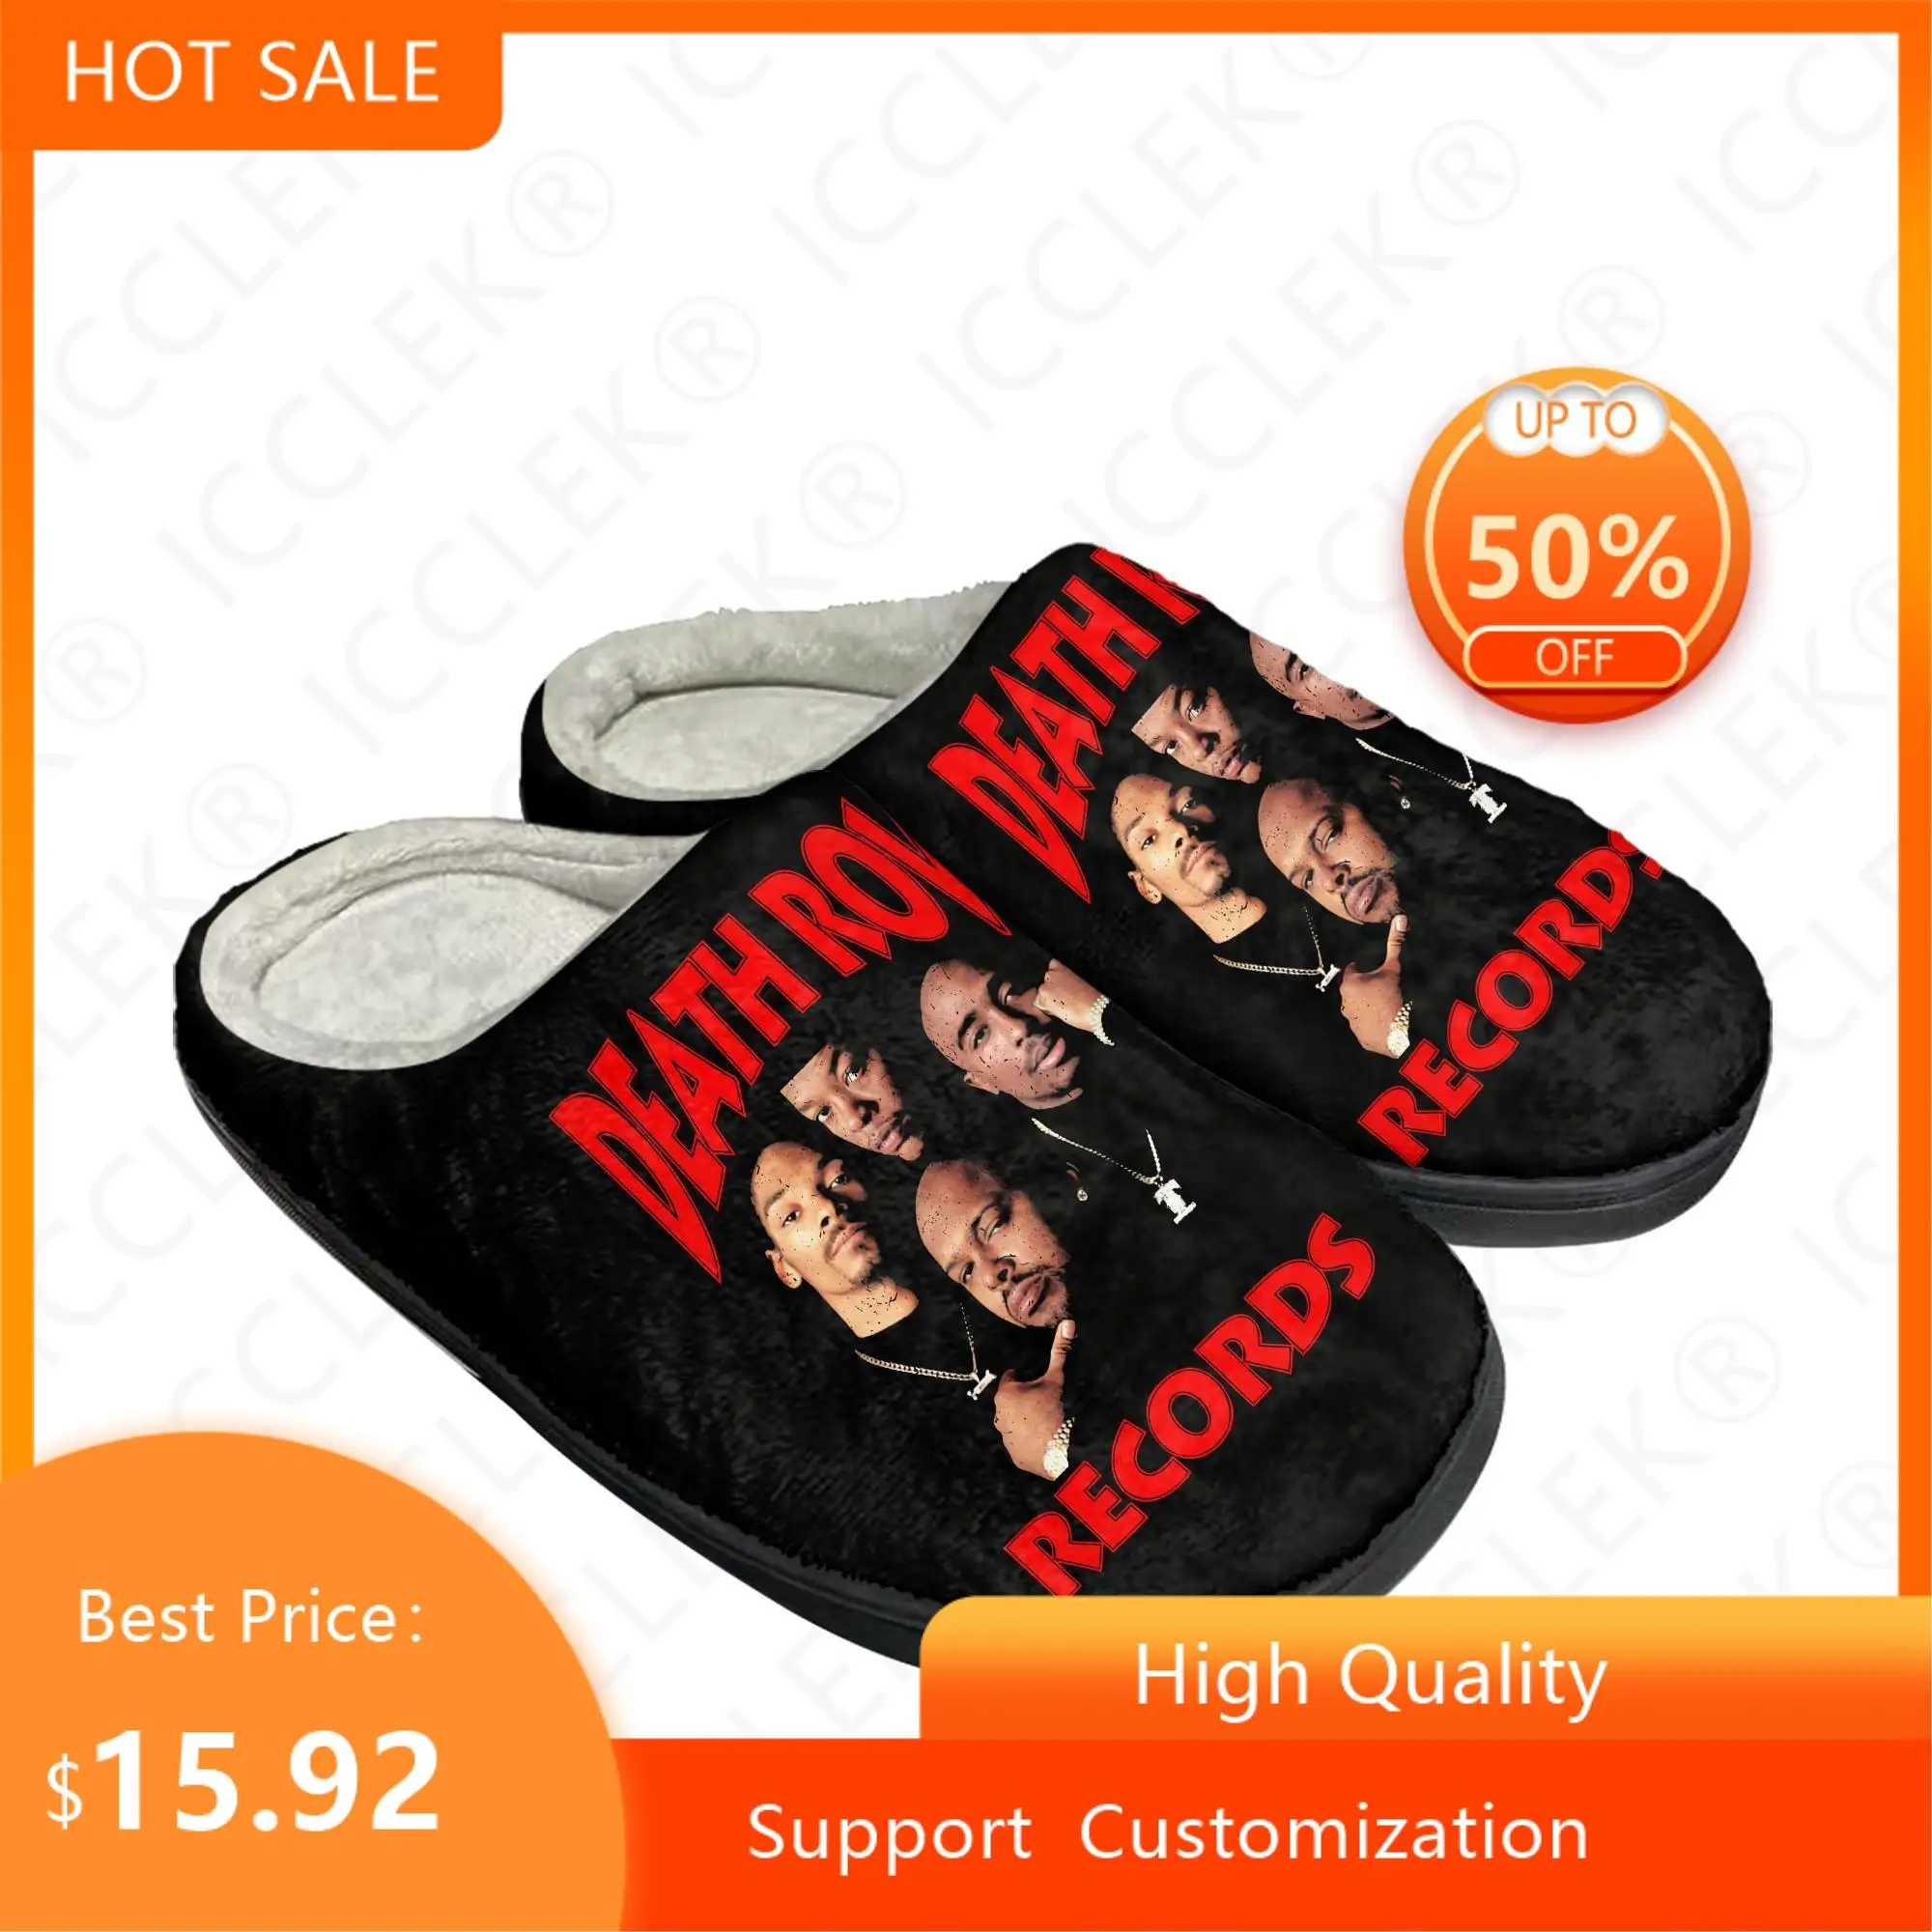 Death Row Records Home Cotton Custom Slippers Mens Womens Sandals Plush Pattern Non-Slip Casual Keep Warm Shoes Thermal Slipper